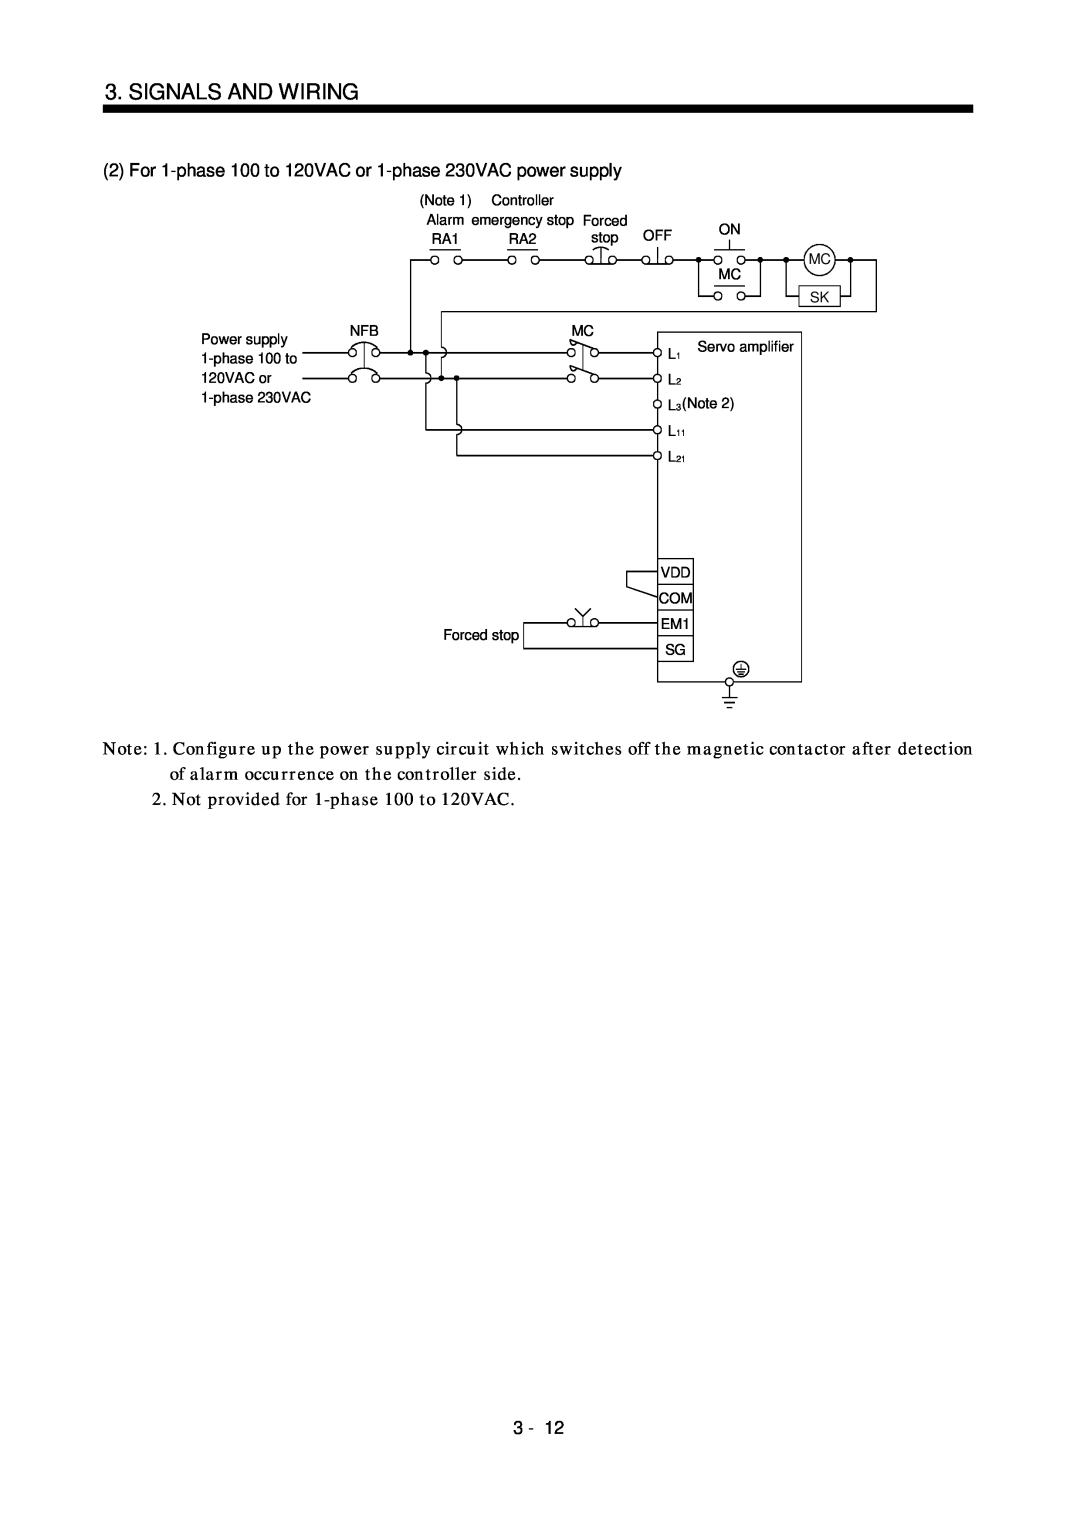 Bose MR-J2S- B instruction manual Signals And Wiring, Not provided for 1-phase100 to 120VAC 